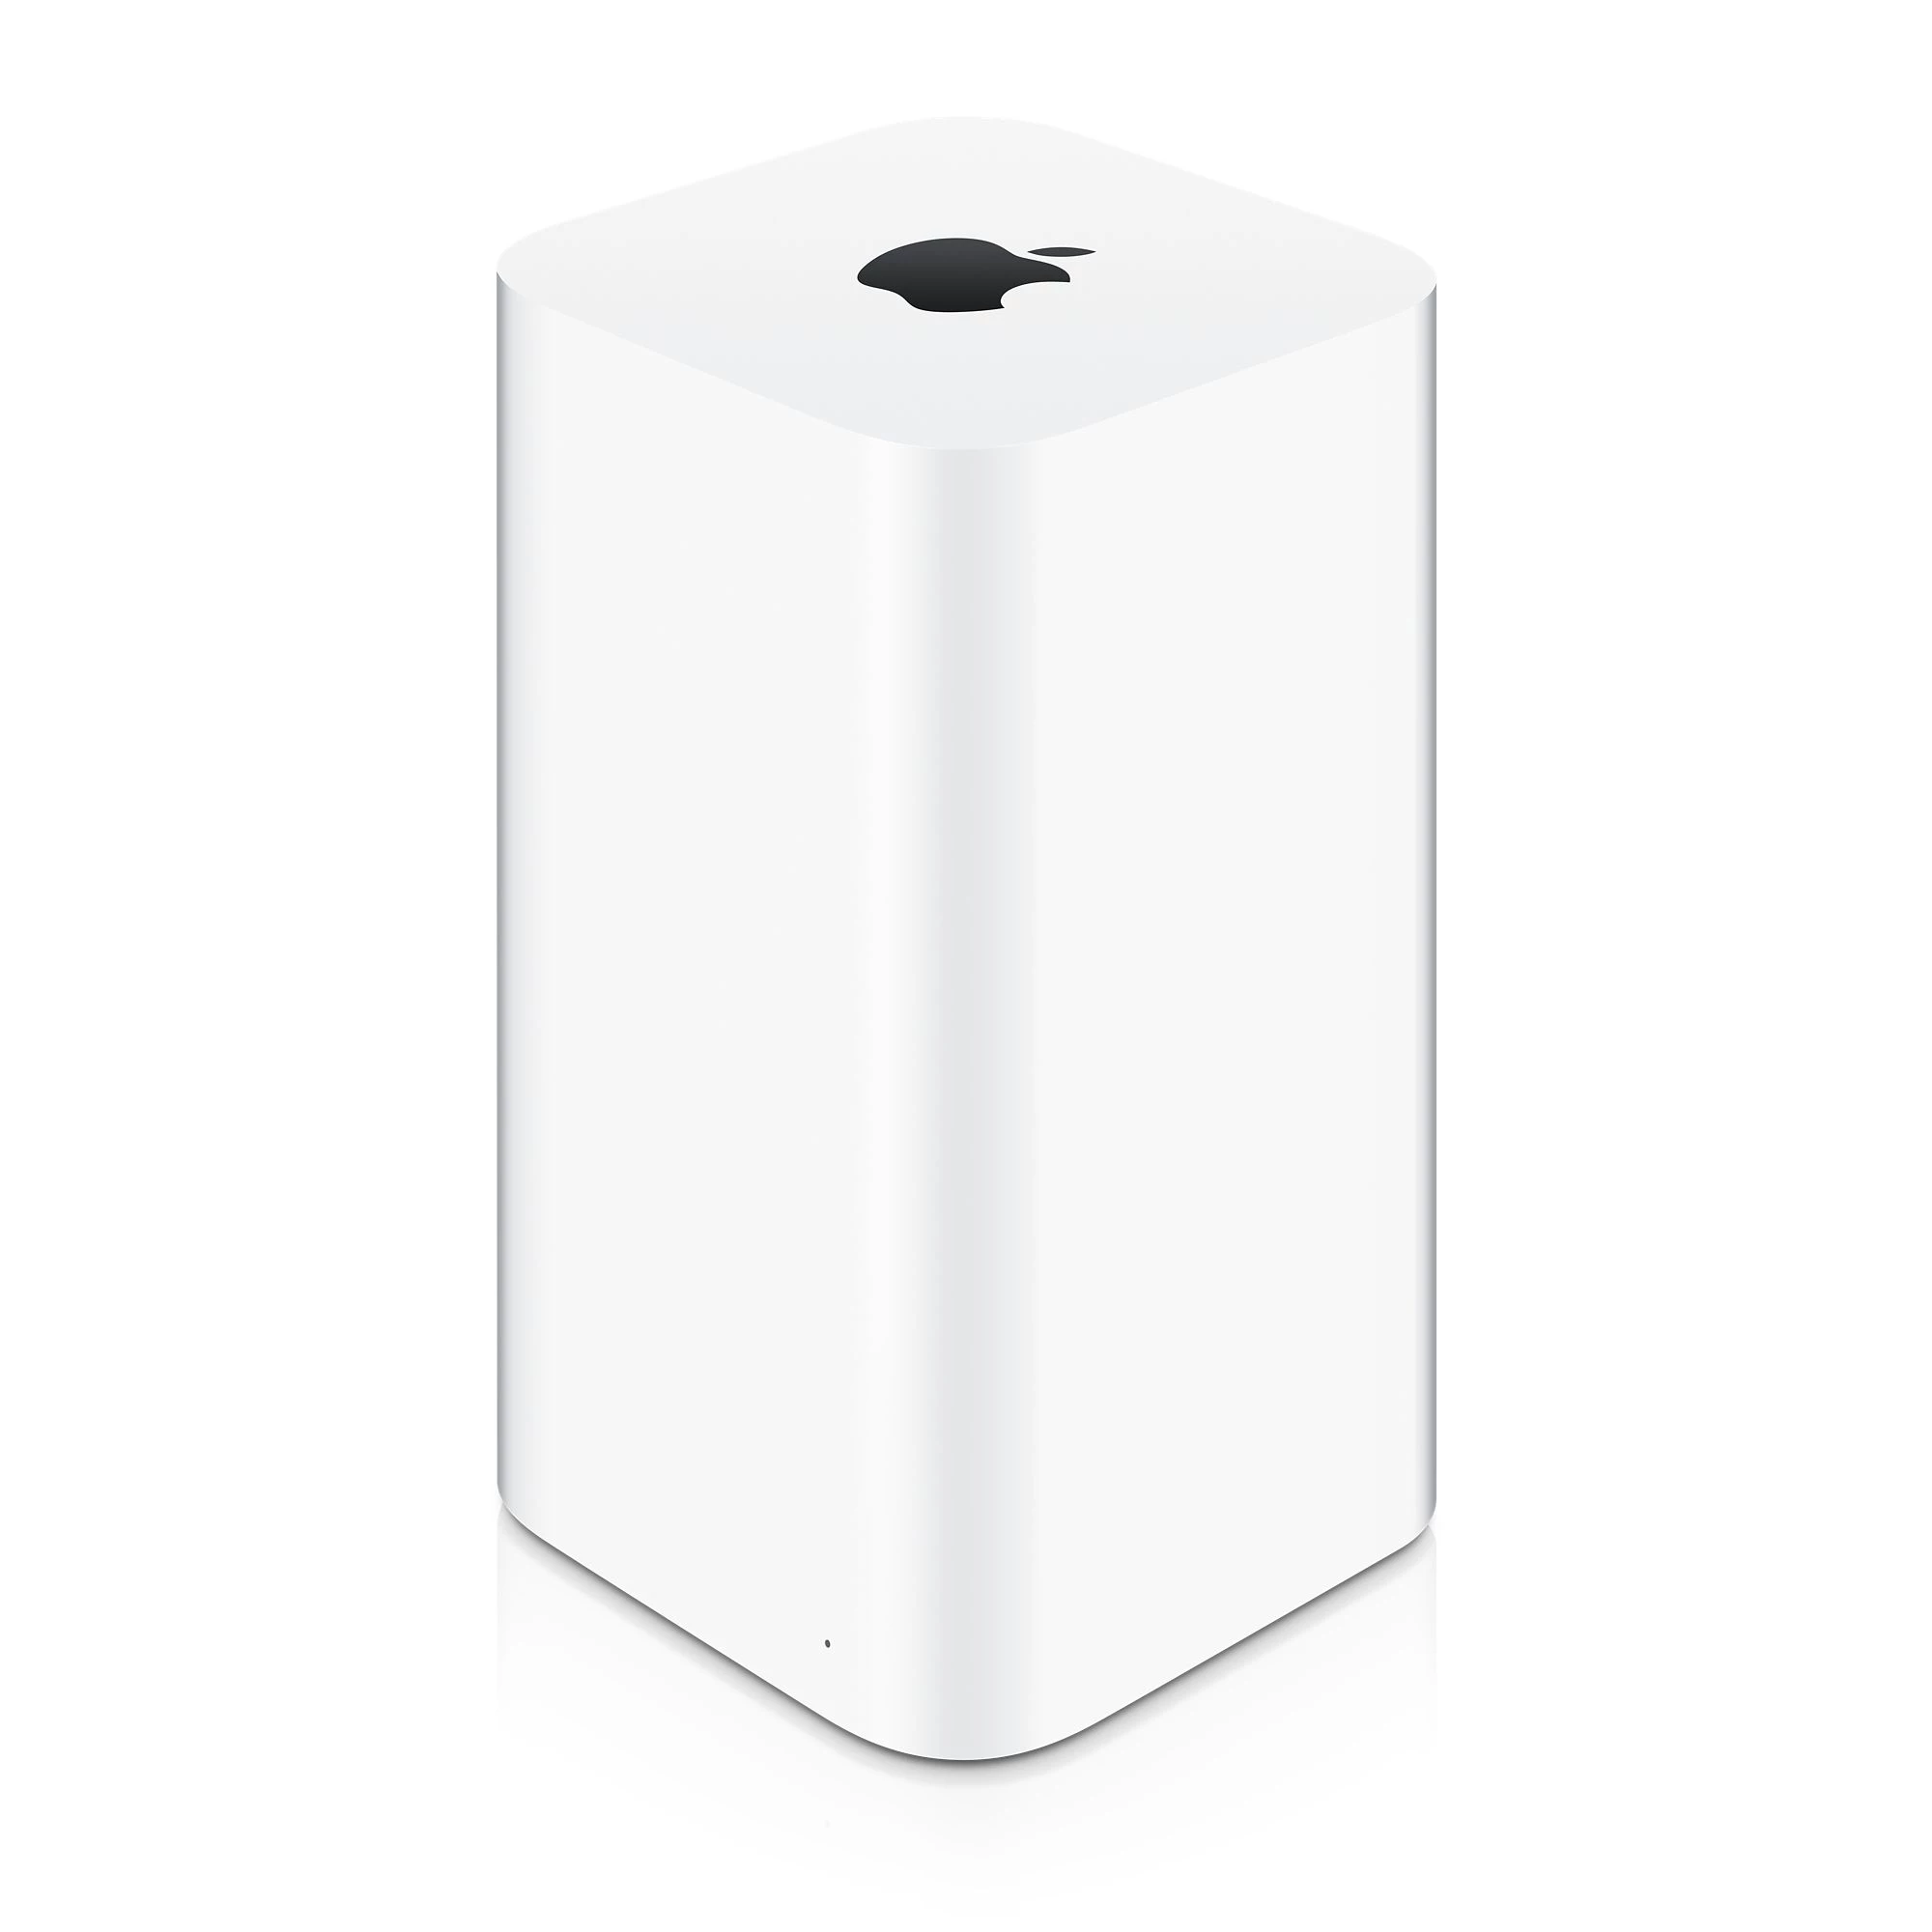 Apple AirPort Extreme (ME918) NEW